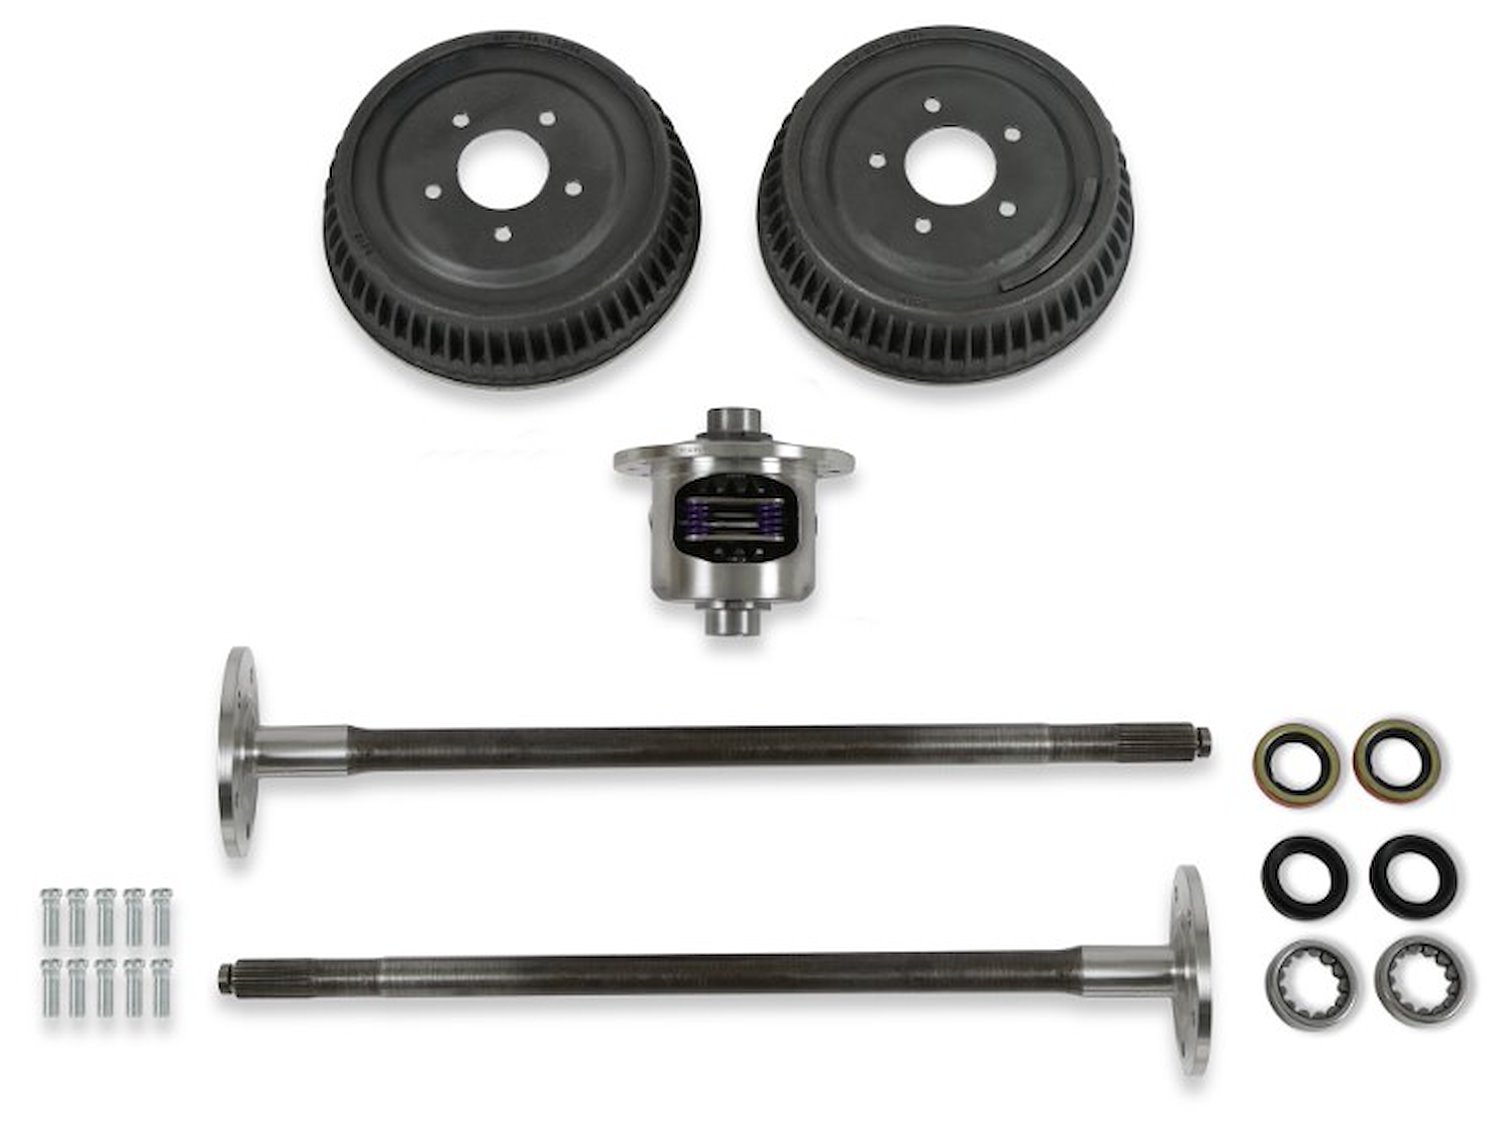 5-Lug Conversion Rear Axle Kit for 1963-1969 Chevy,